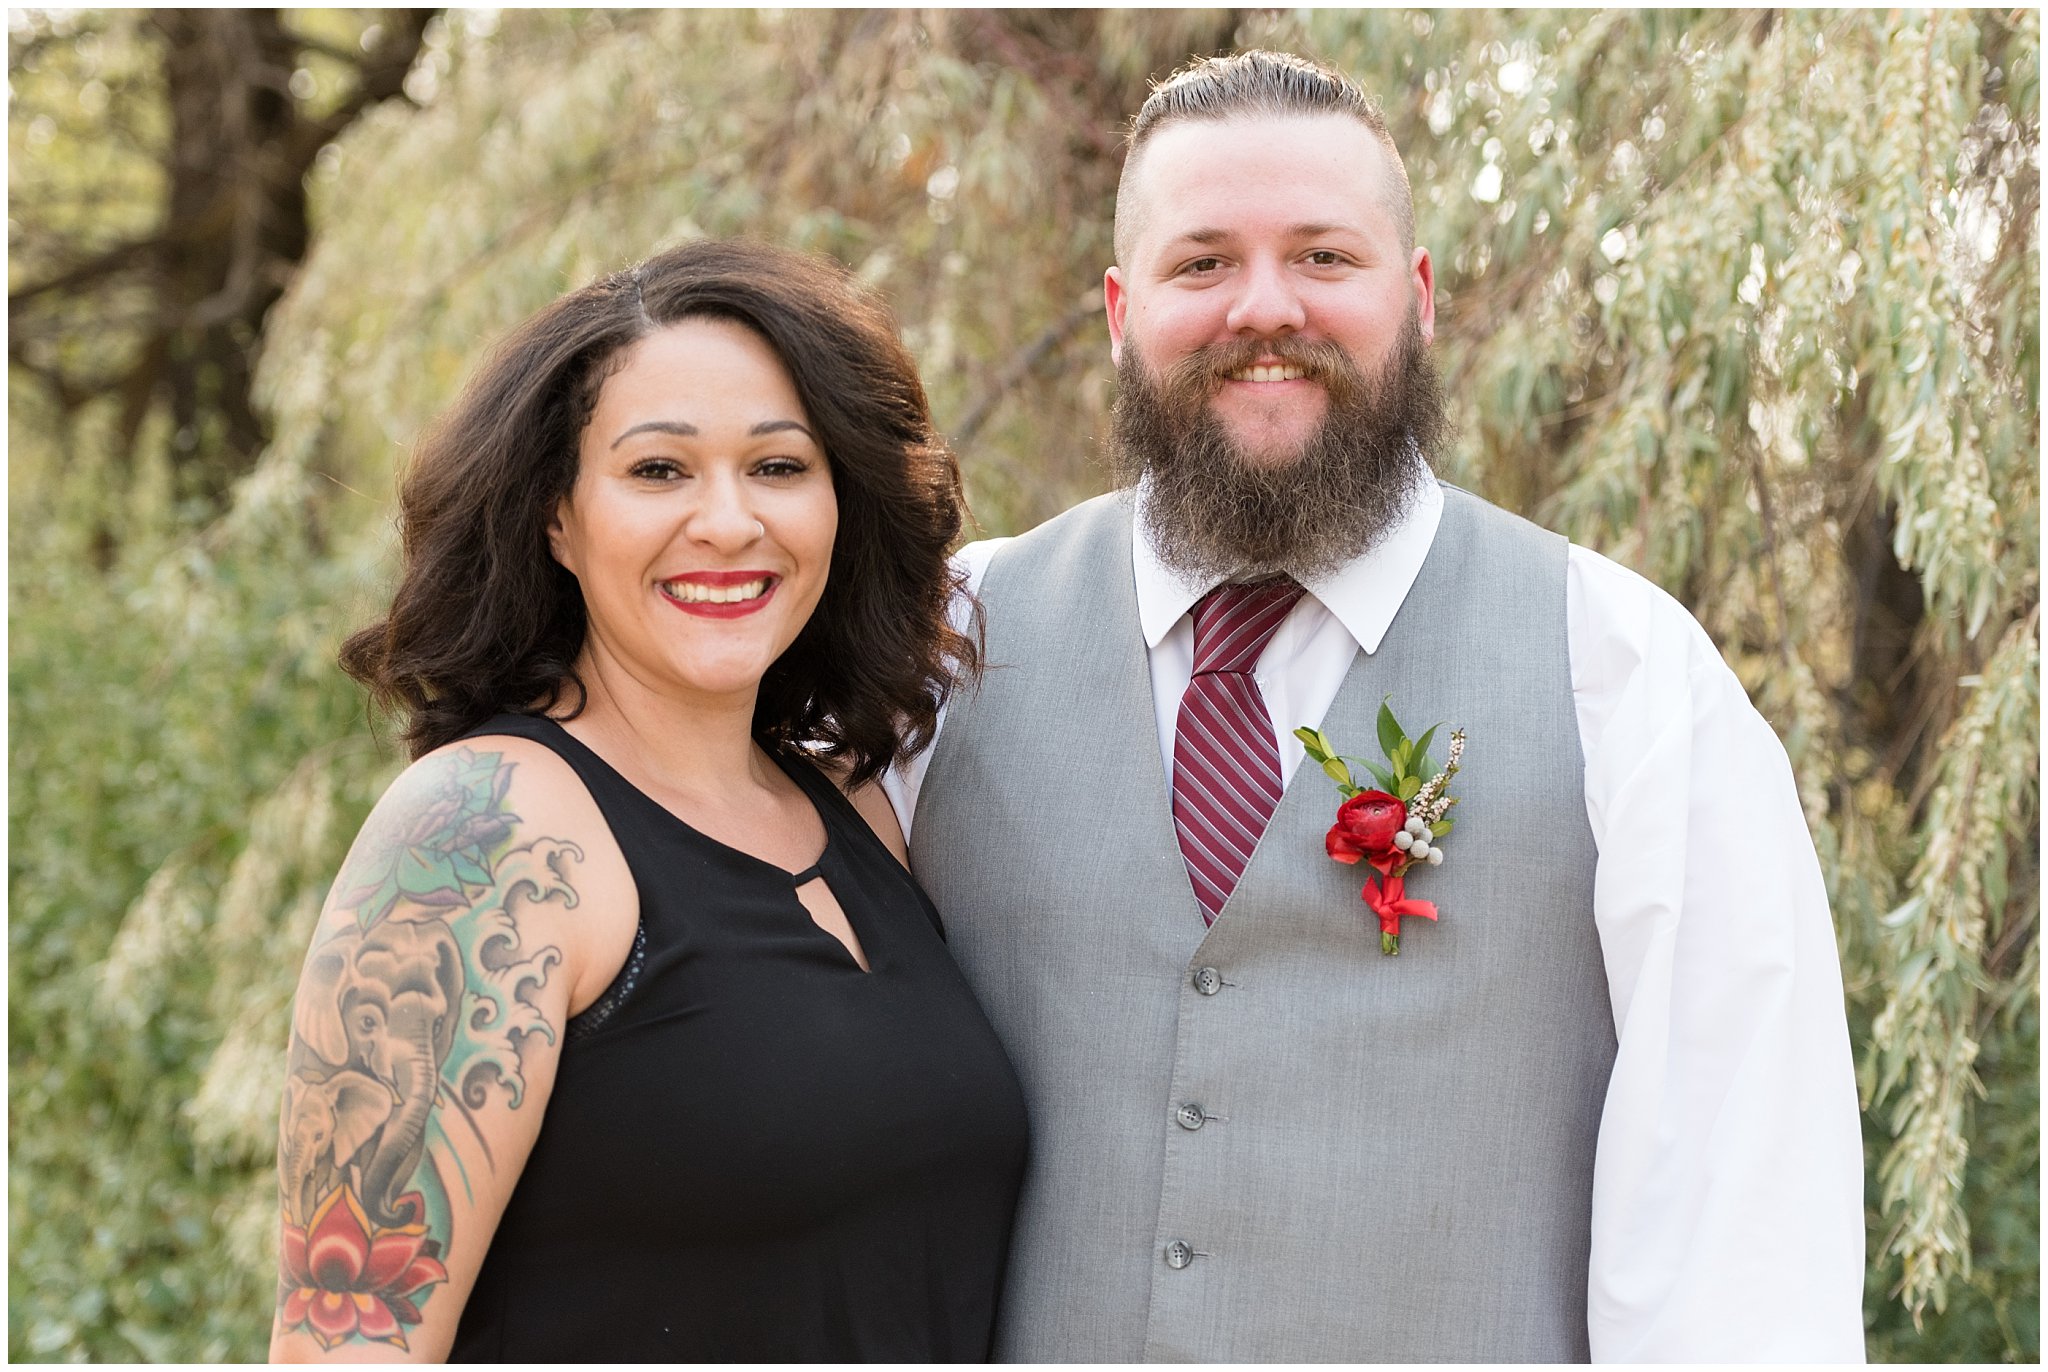 Spouses portrait | Red and Grey wedding | Davis County Outdoor Wedding | Jessie and Dallin Photography